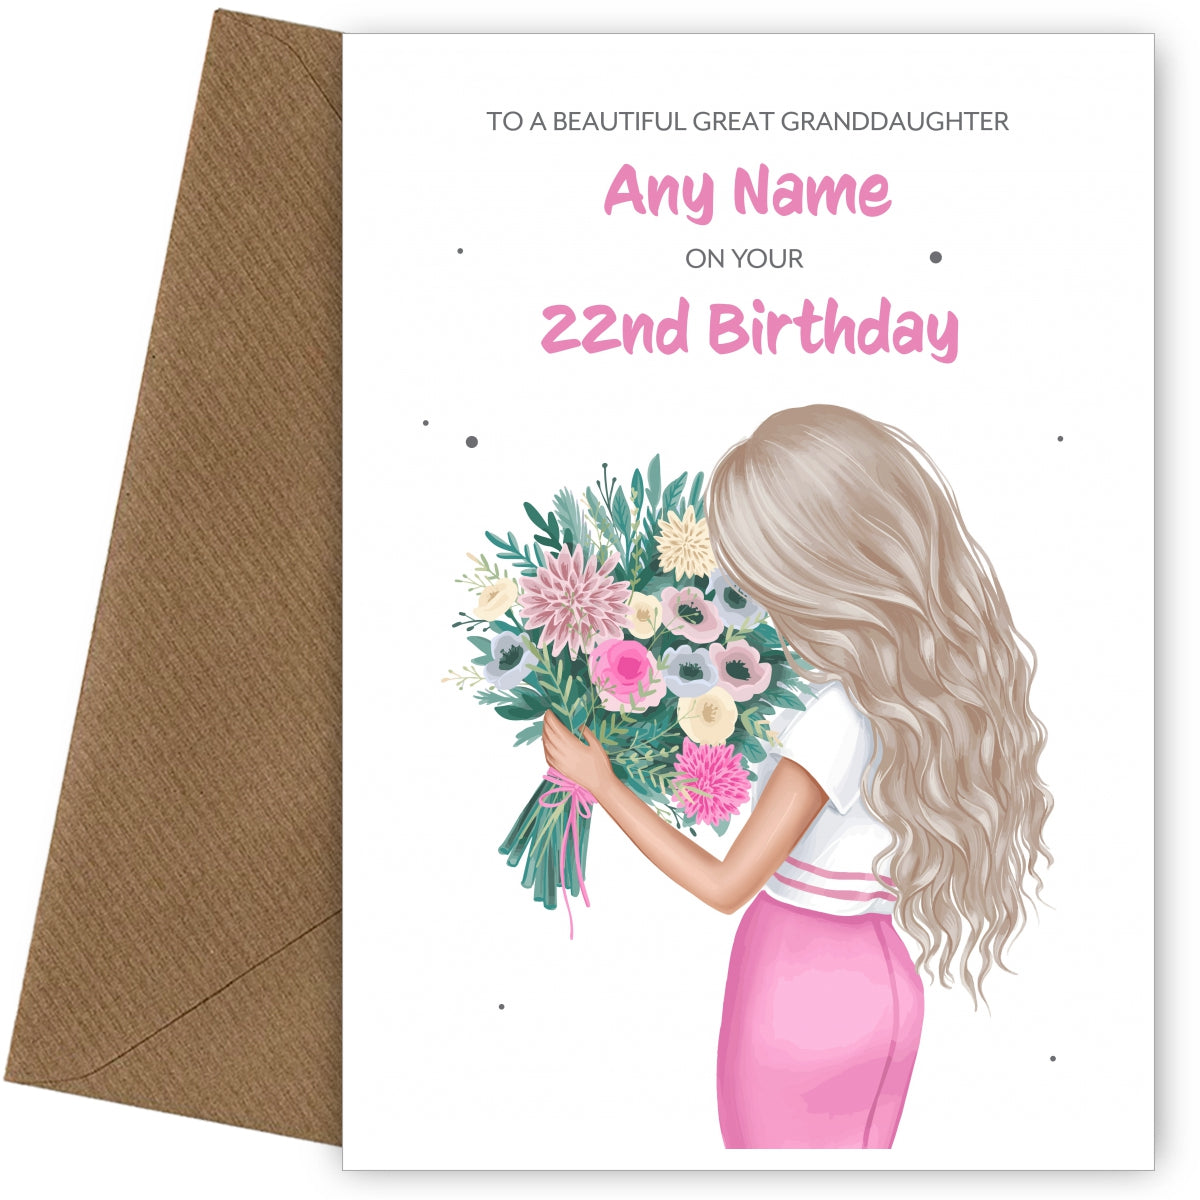 22nd Birthday Card for Great Granddaughter - Beautiful Blonde